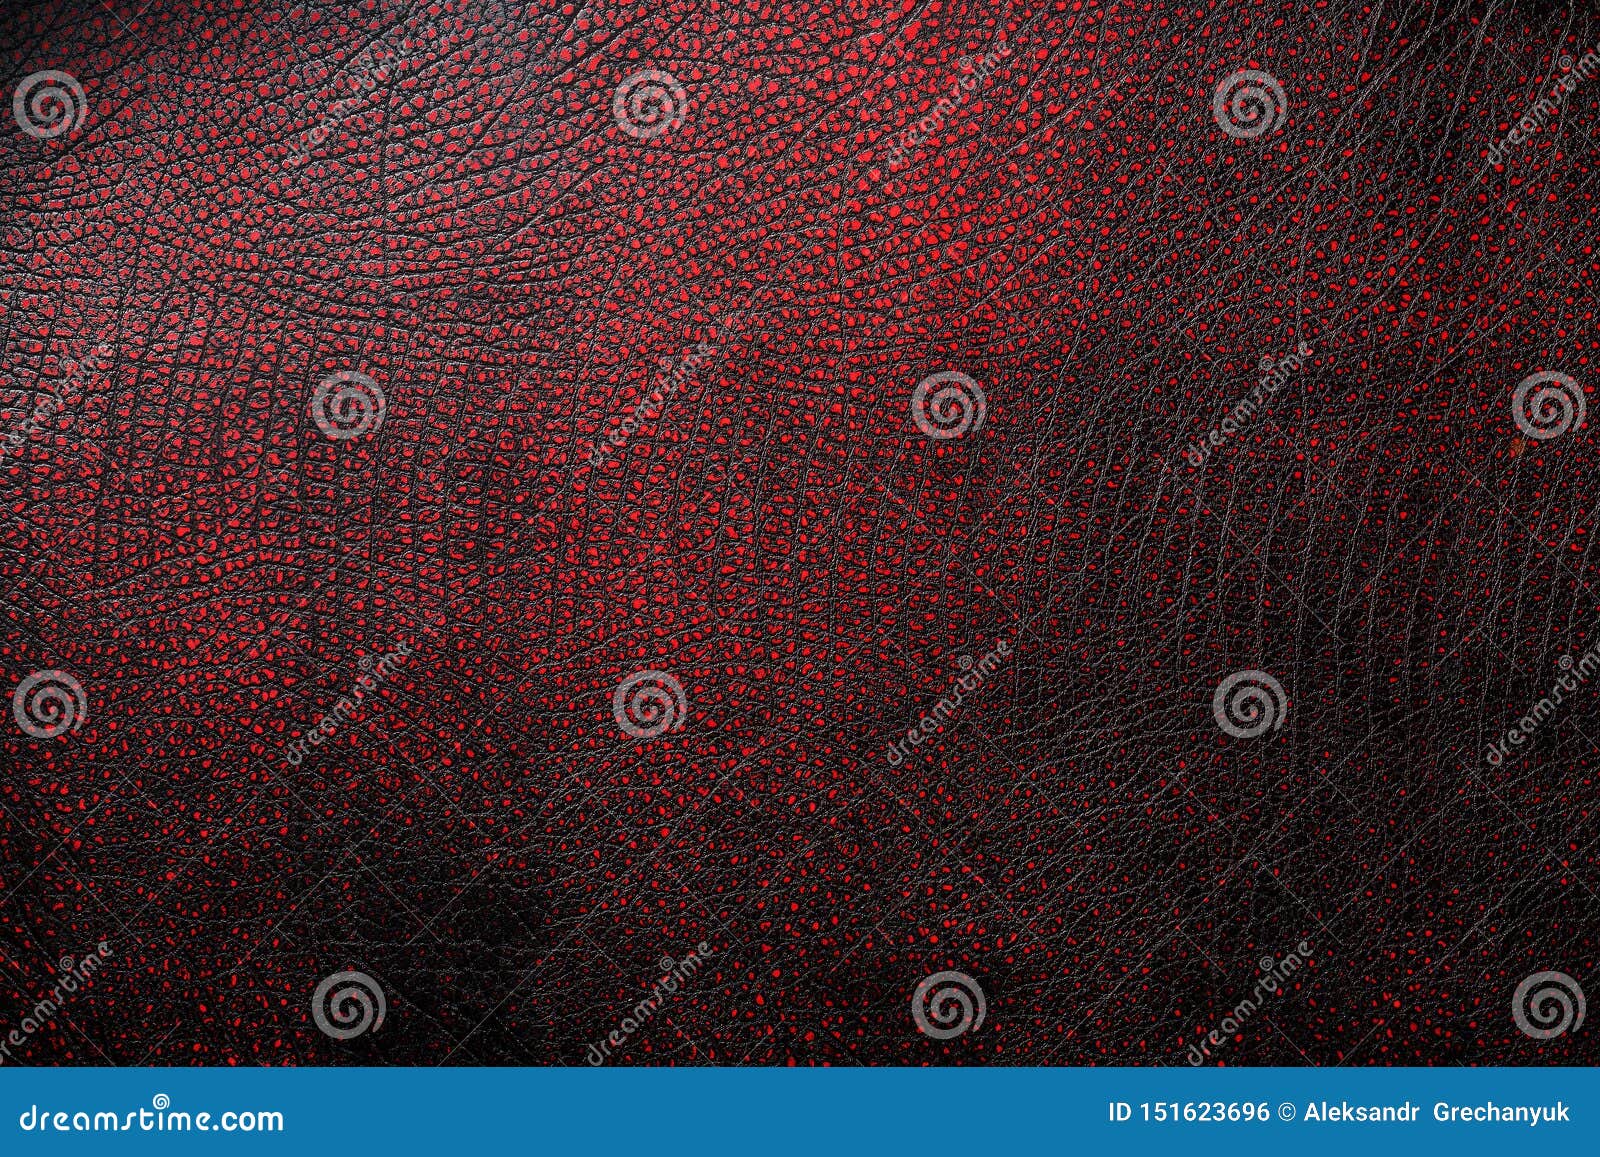 red - black textured reptile skin, used texture for the background. lizard or crocodile skin